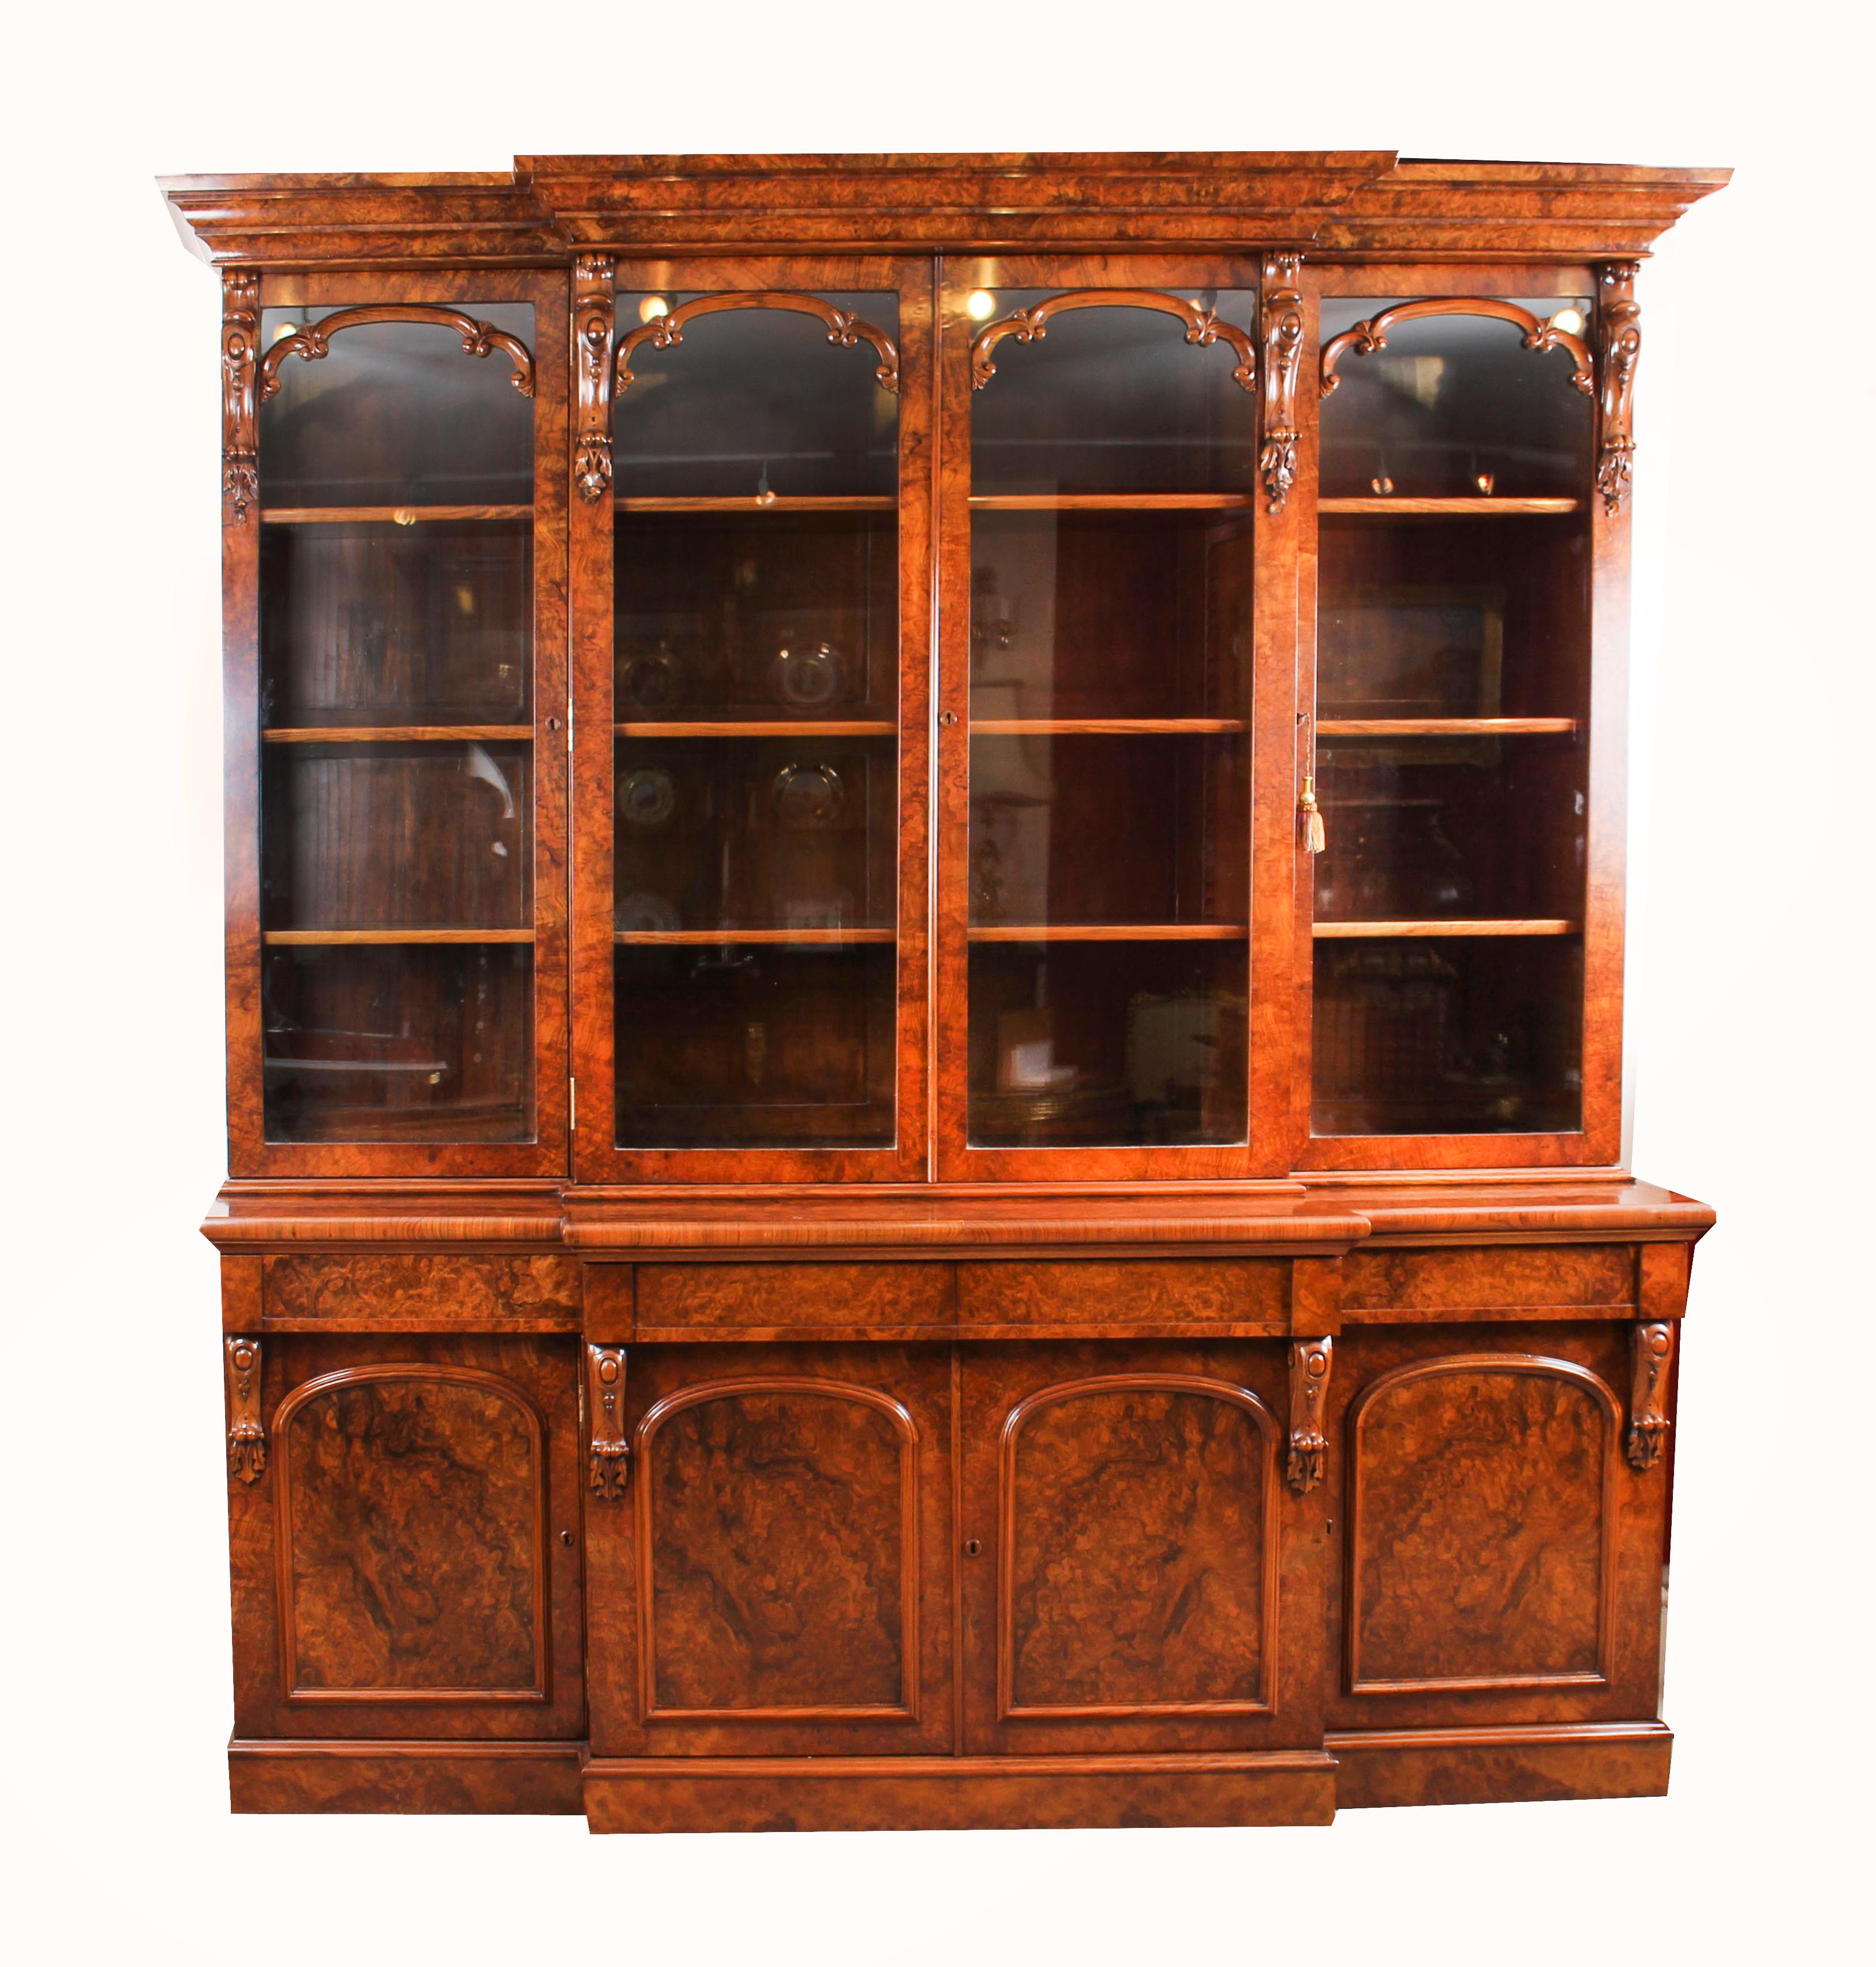 A stunning antique English early Victorian top quality four door breakfront bookcase, masterfully crafted in rich burr walnut, circa 1850 in date.

This magnificent bookcase features a flared breakfront cornice over four glazed doors with decorative